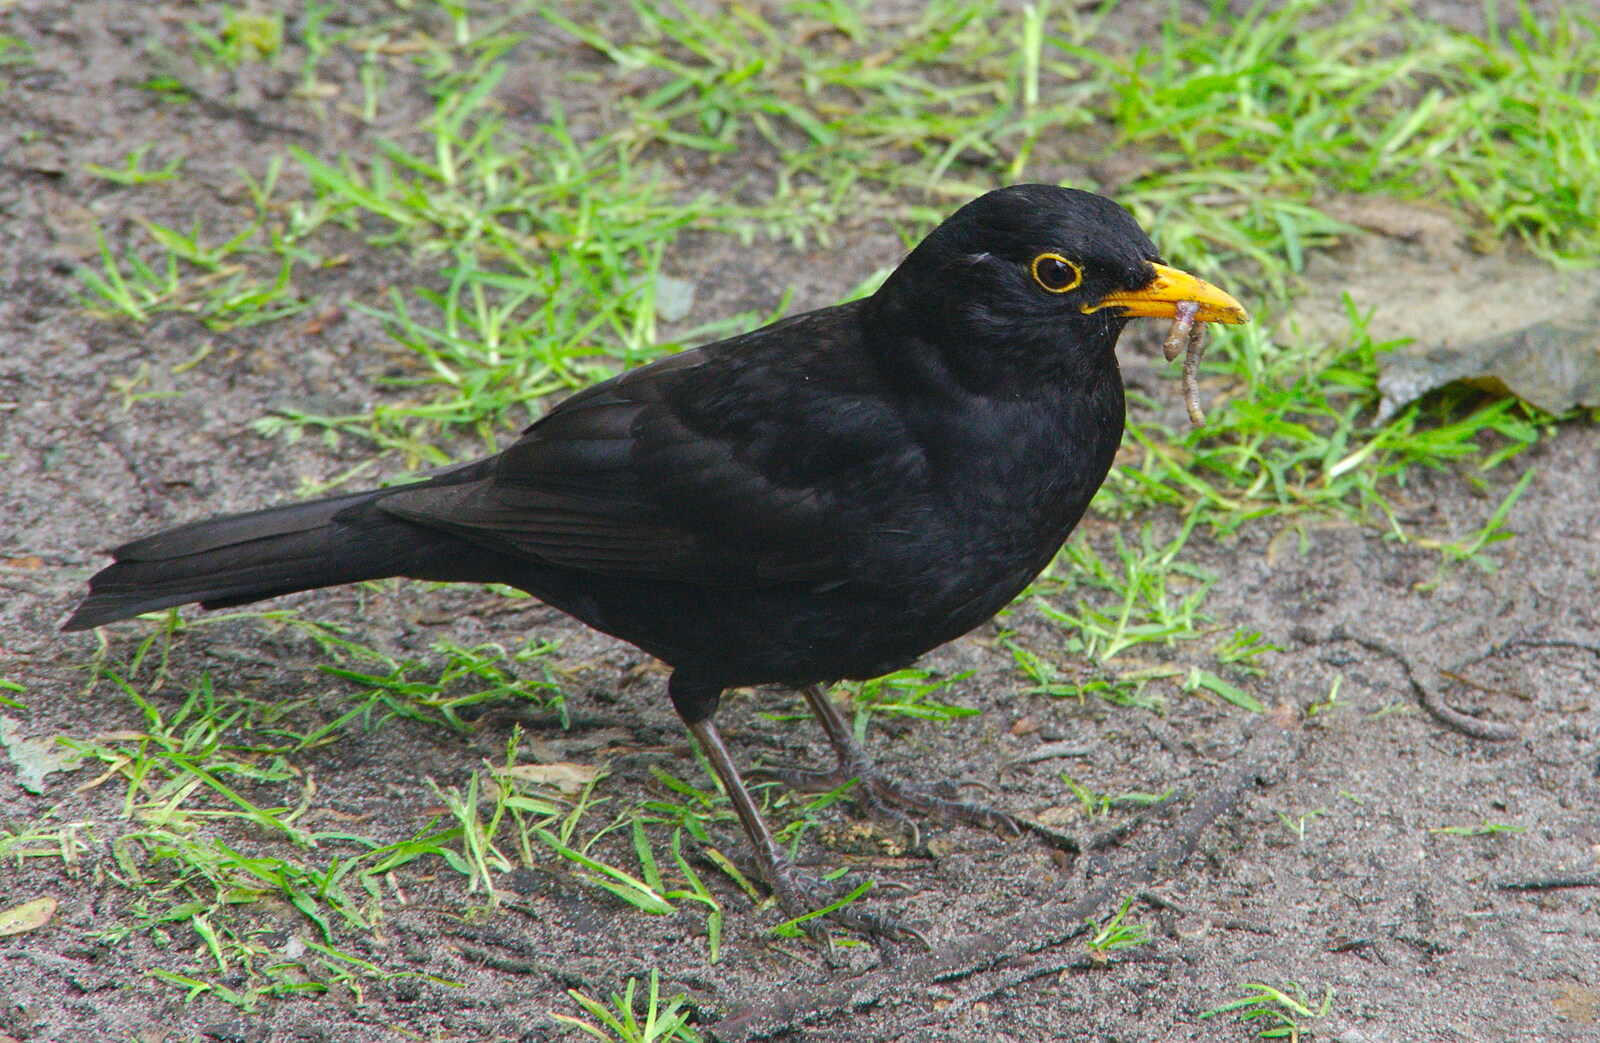 The blackbird has a worm in its beak from Cliff House Camping, Dunwich, Suffolk - 15th June 2019